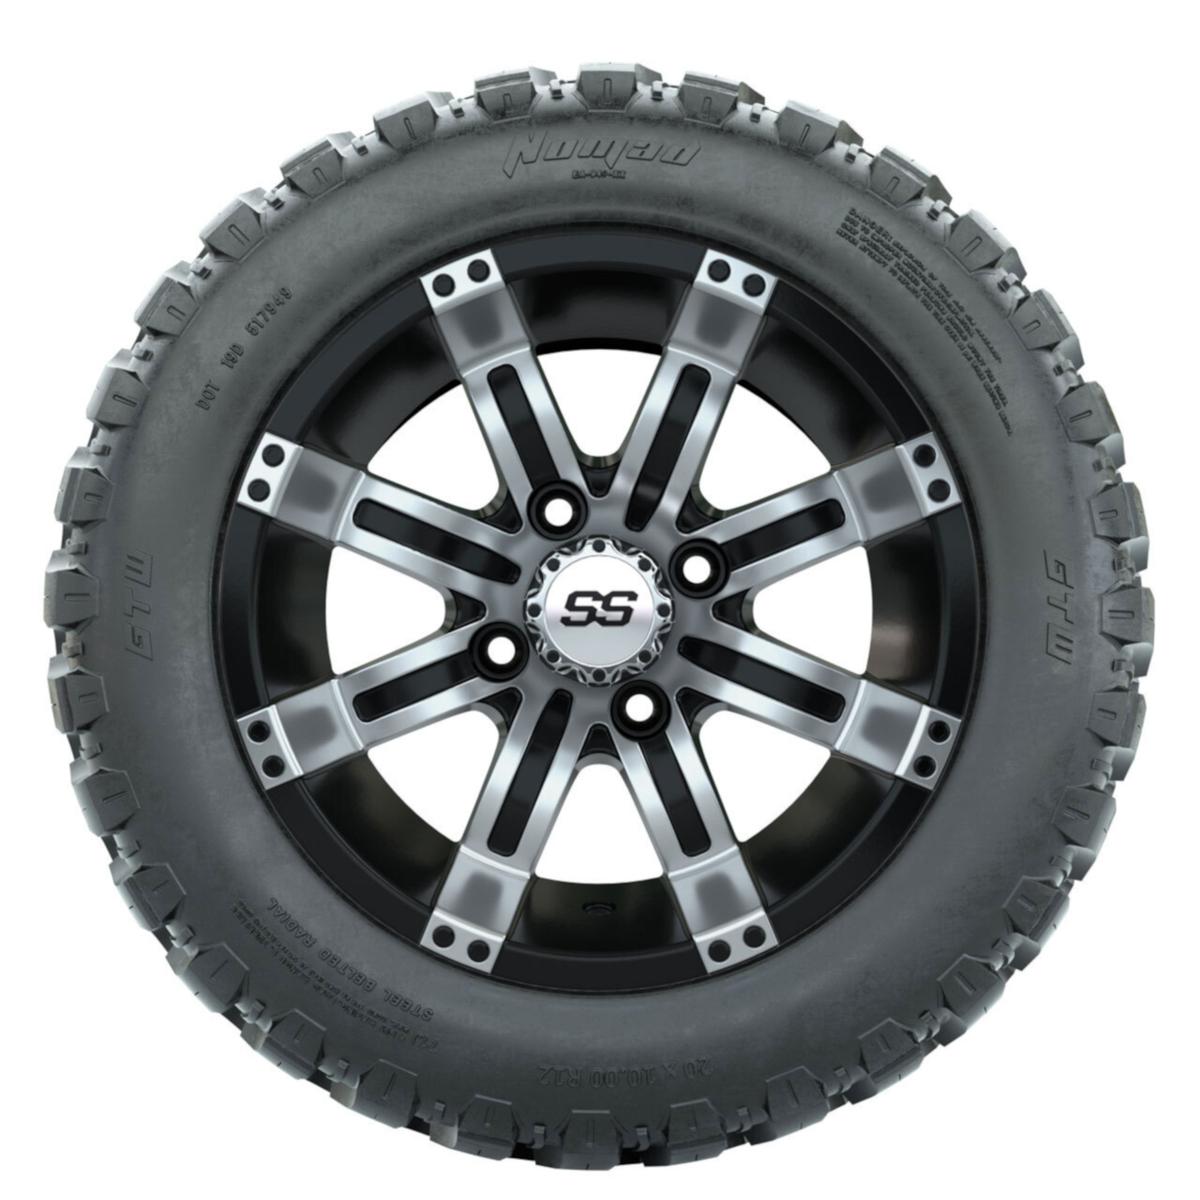 Set of (4) 12 in GTW Tempest Wheels with 20x10-R12 GTW Nomad All-Terrain Tires